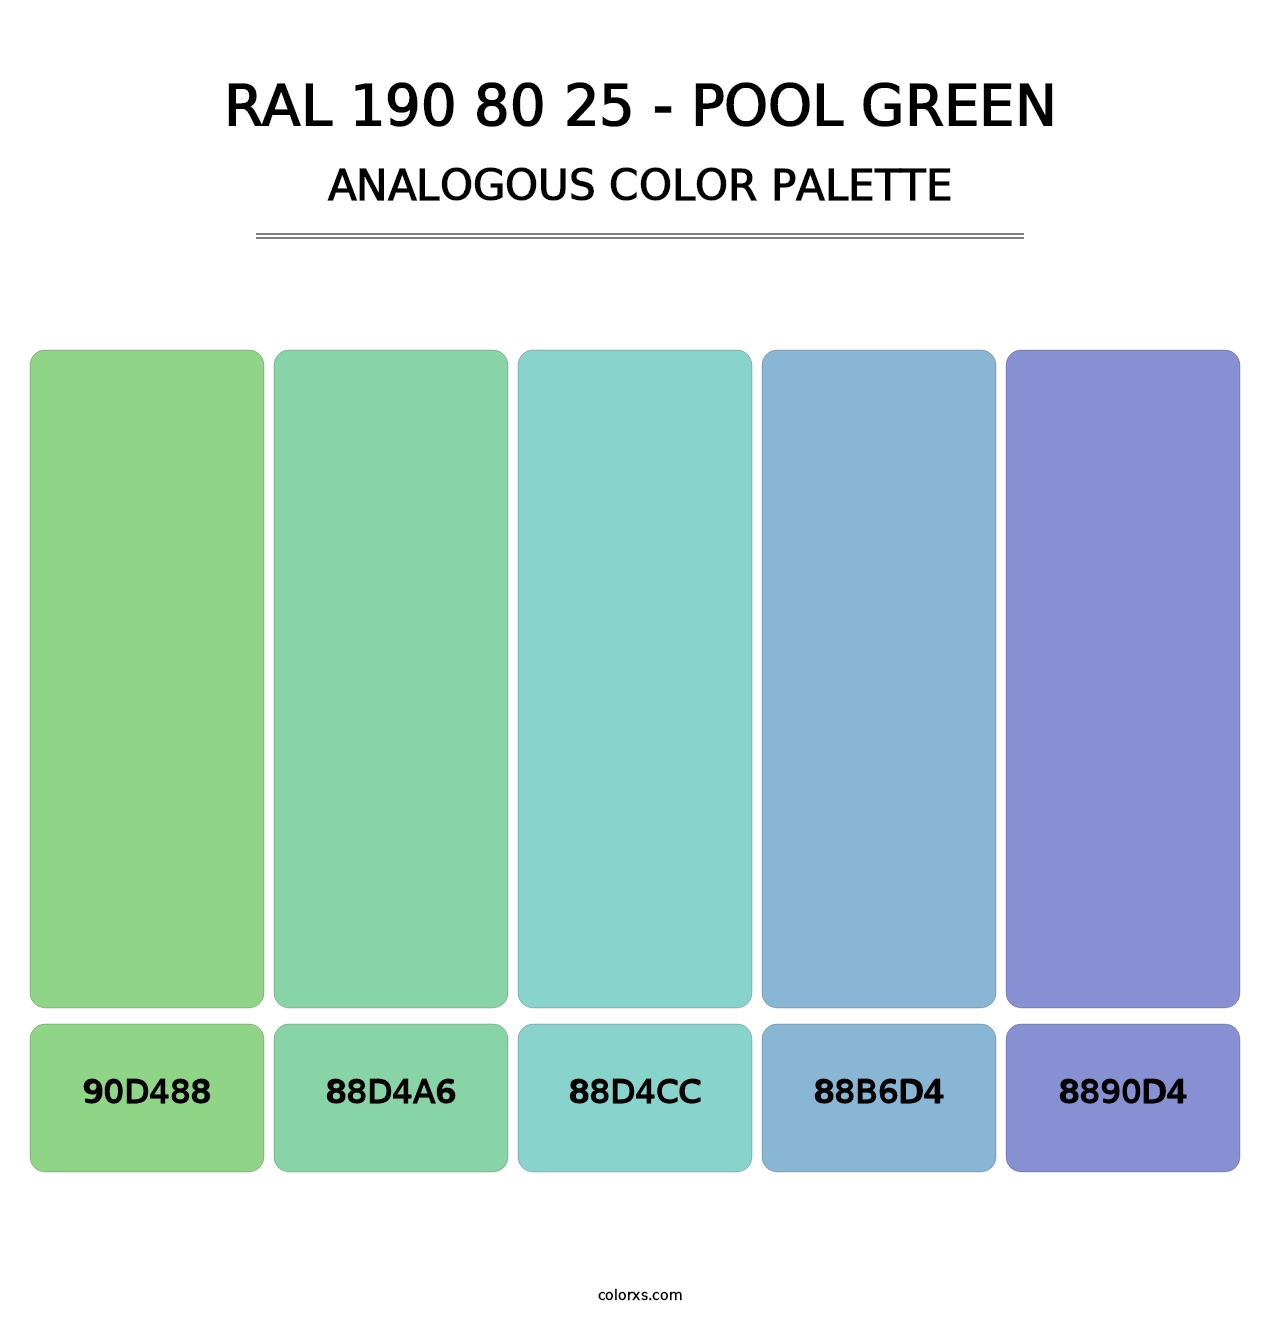 RAL 190 80 25 - Pool Green - Analogous Color Palette